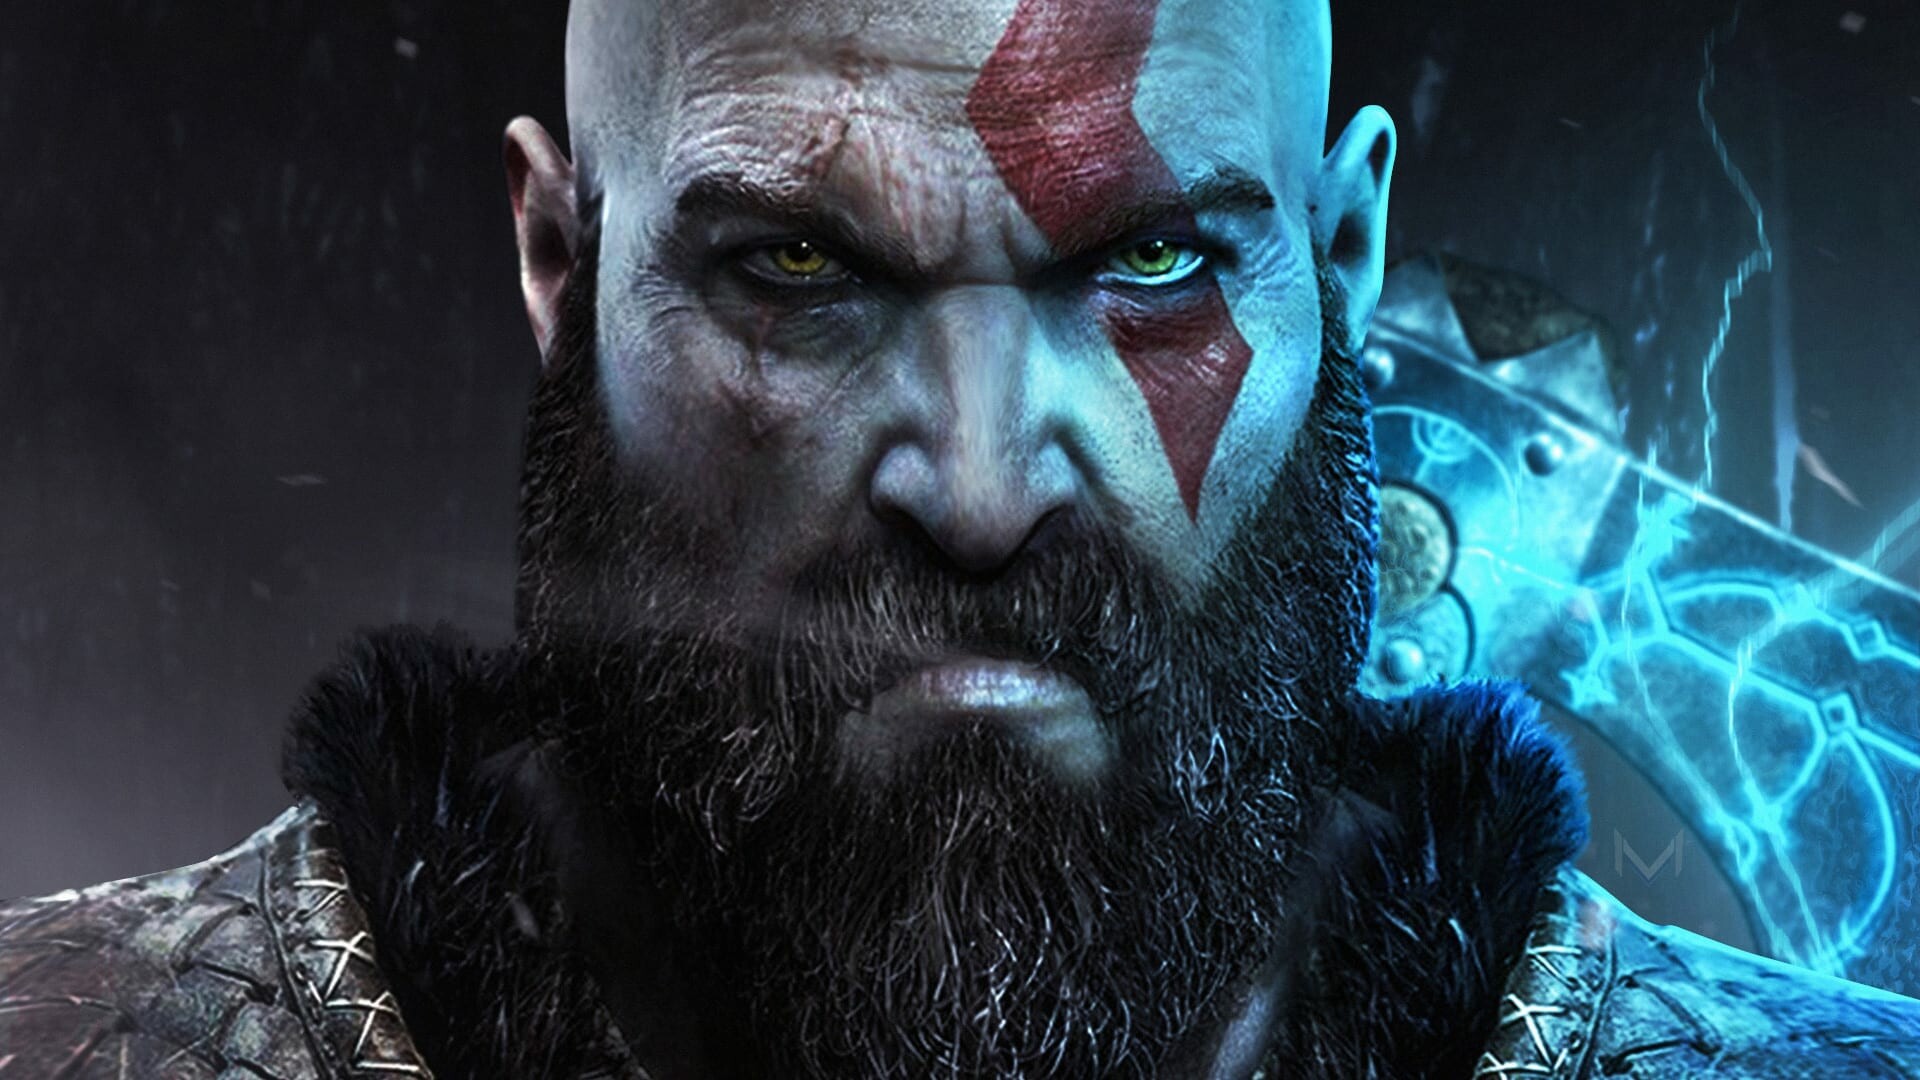 God of War: Ragnarok: Was named as Time magazine's No. 1 game of the year in 2022. 1920x1080 Full HD Wallpaper.